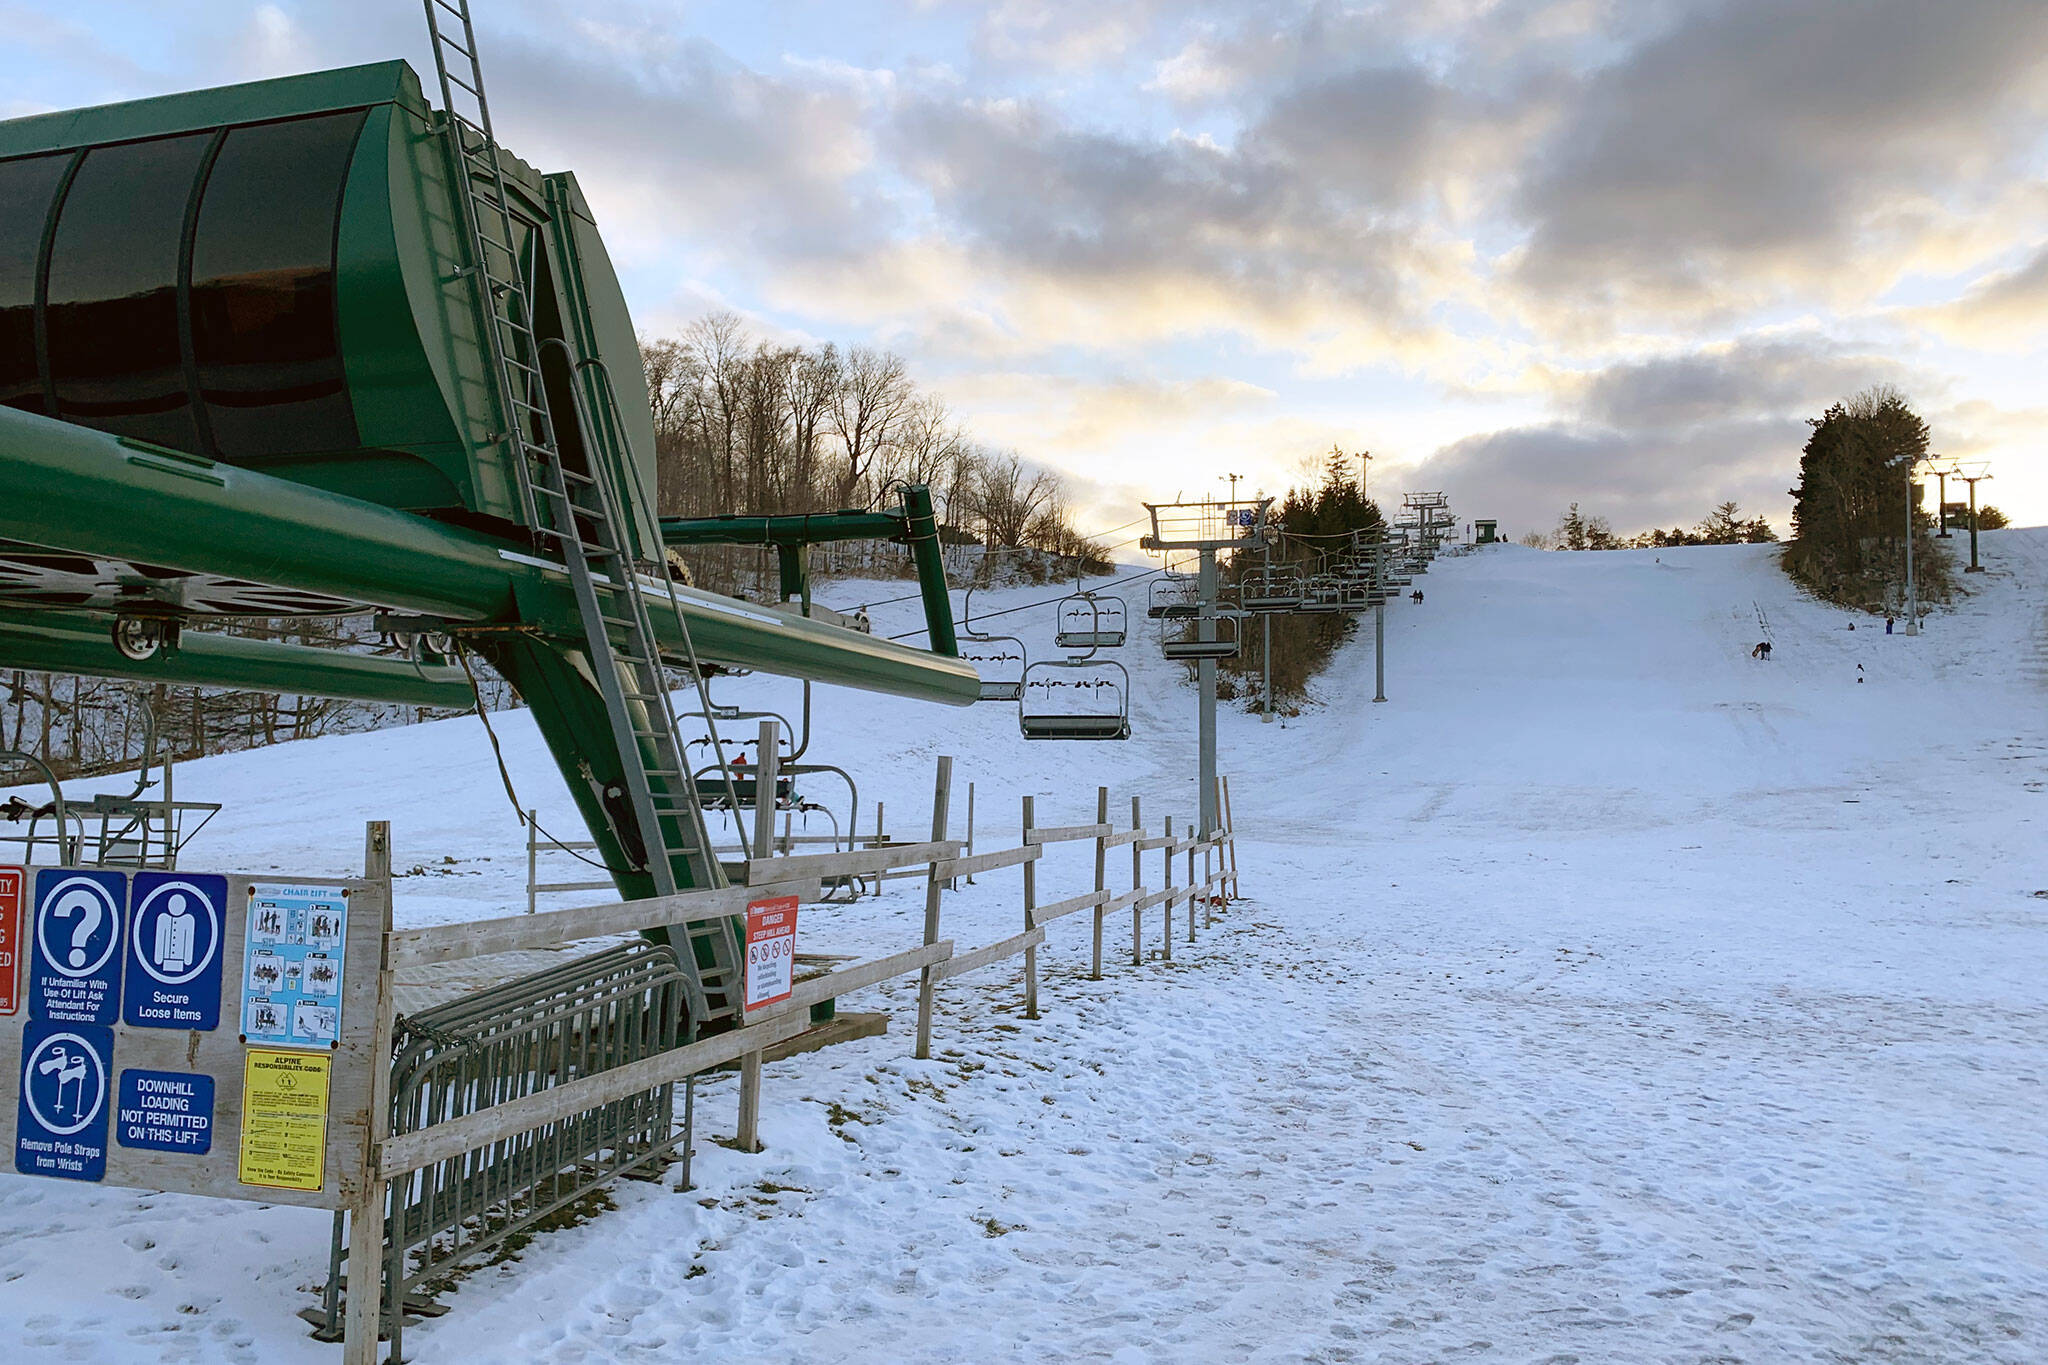 Earl Bales Park in Toronto comes with its own chairlift and ski hill